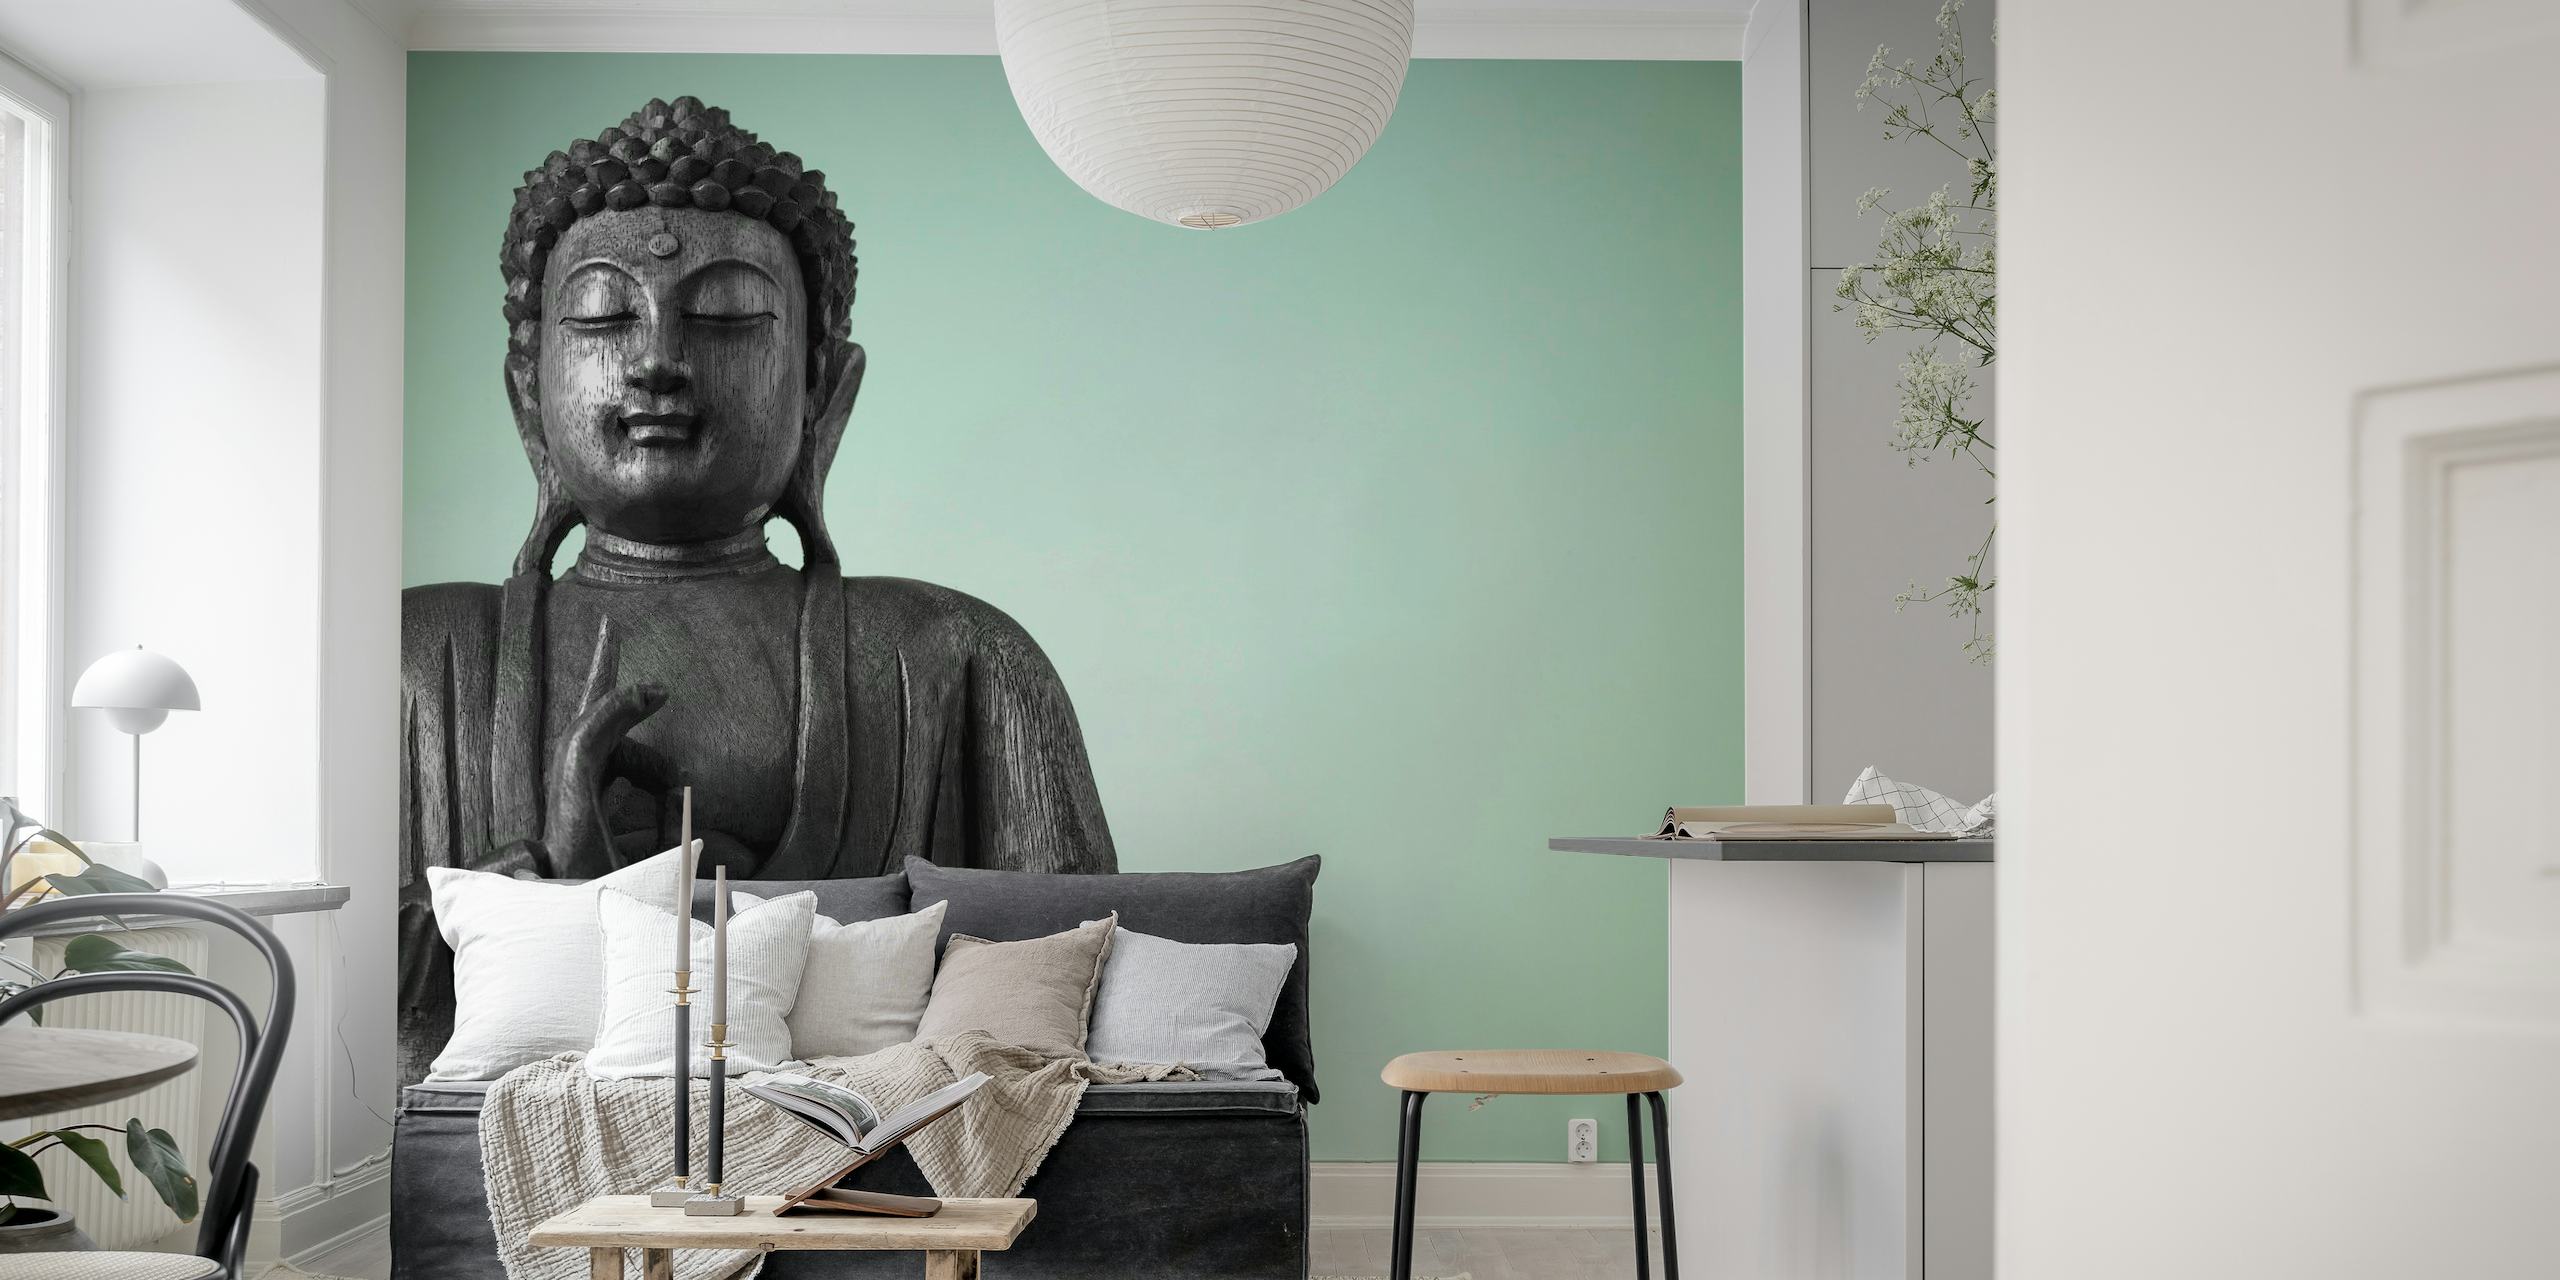 Meditating Buddha wall mural in monochrome for a peaceful home ambiance